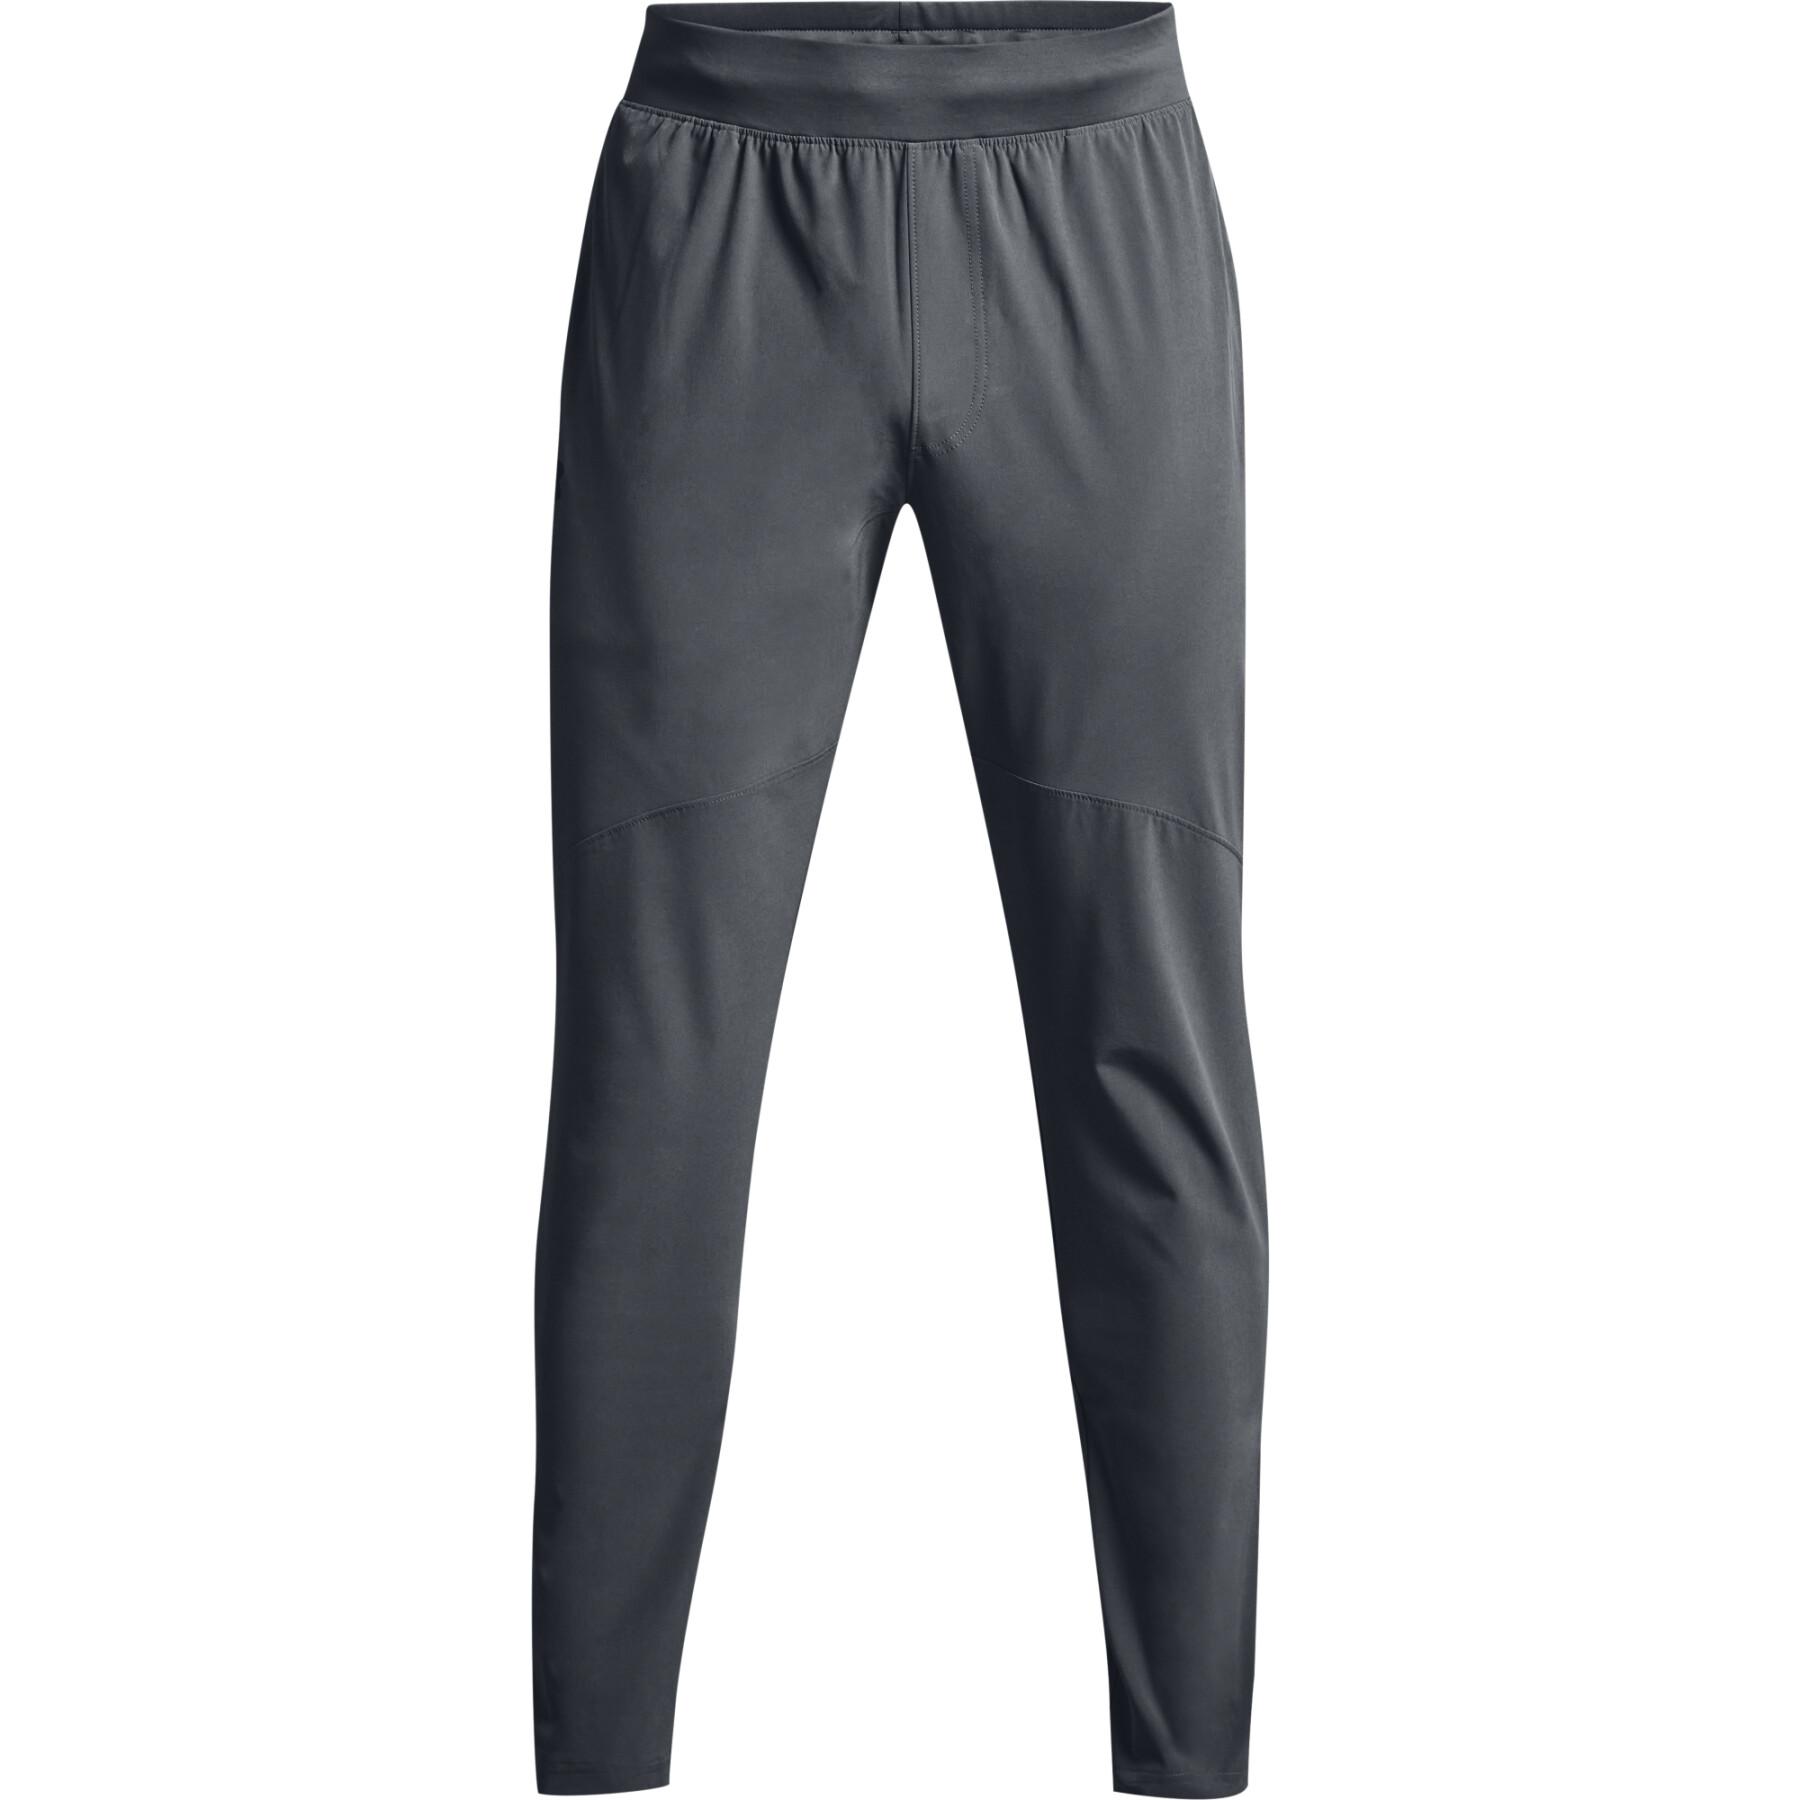 Stretch woven pants Under Armour